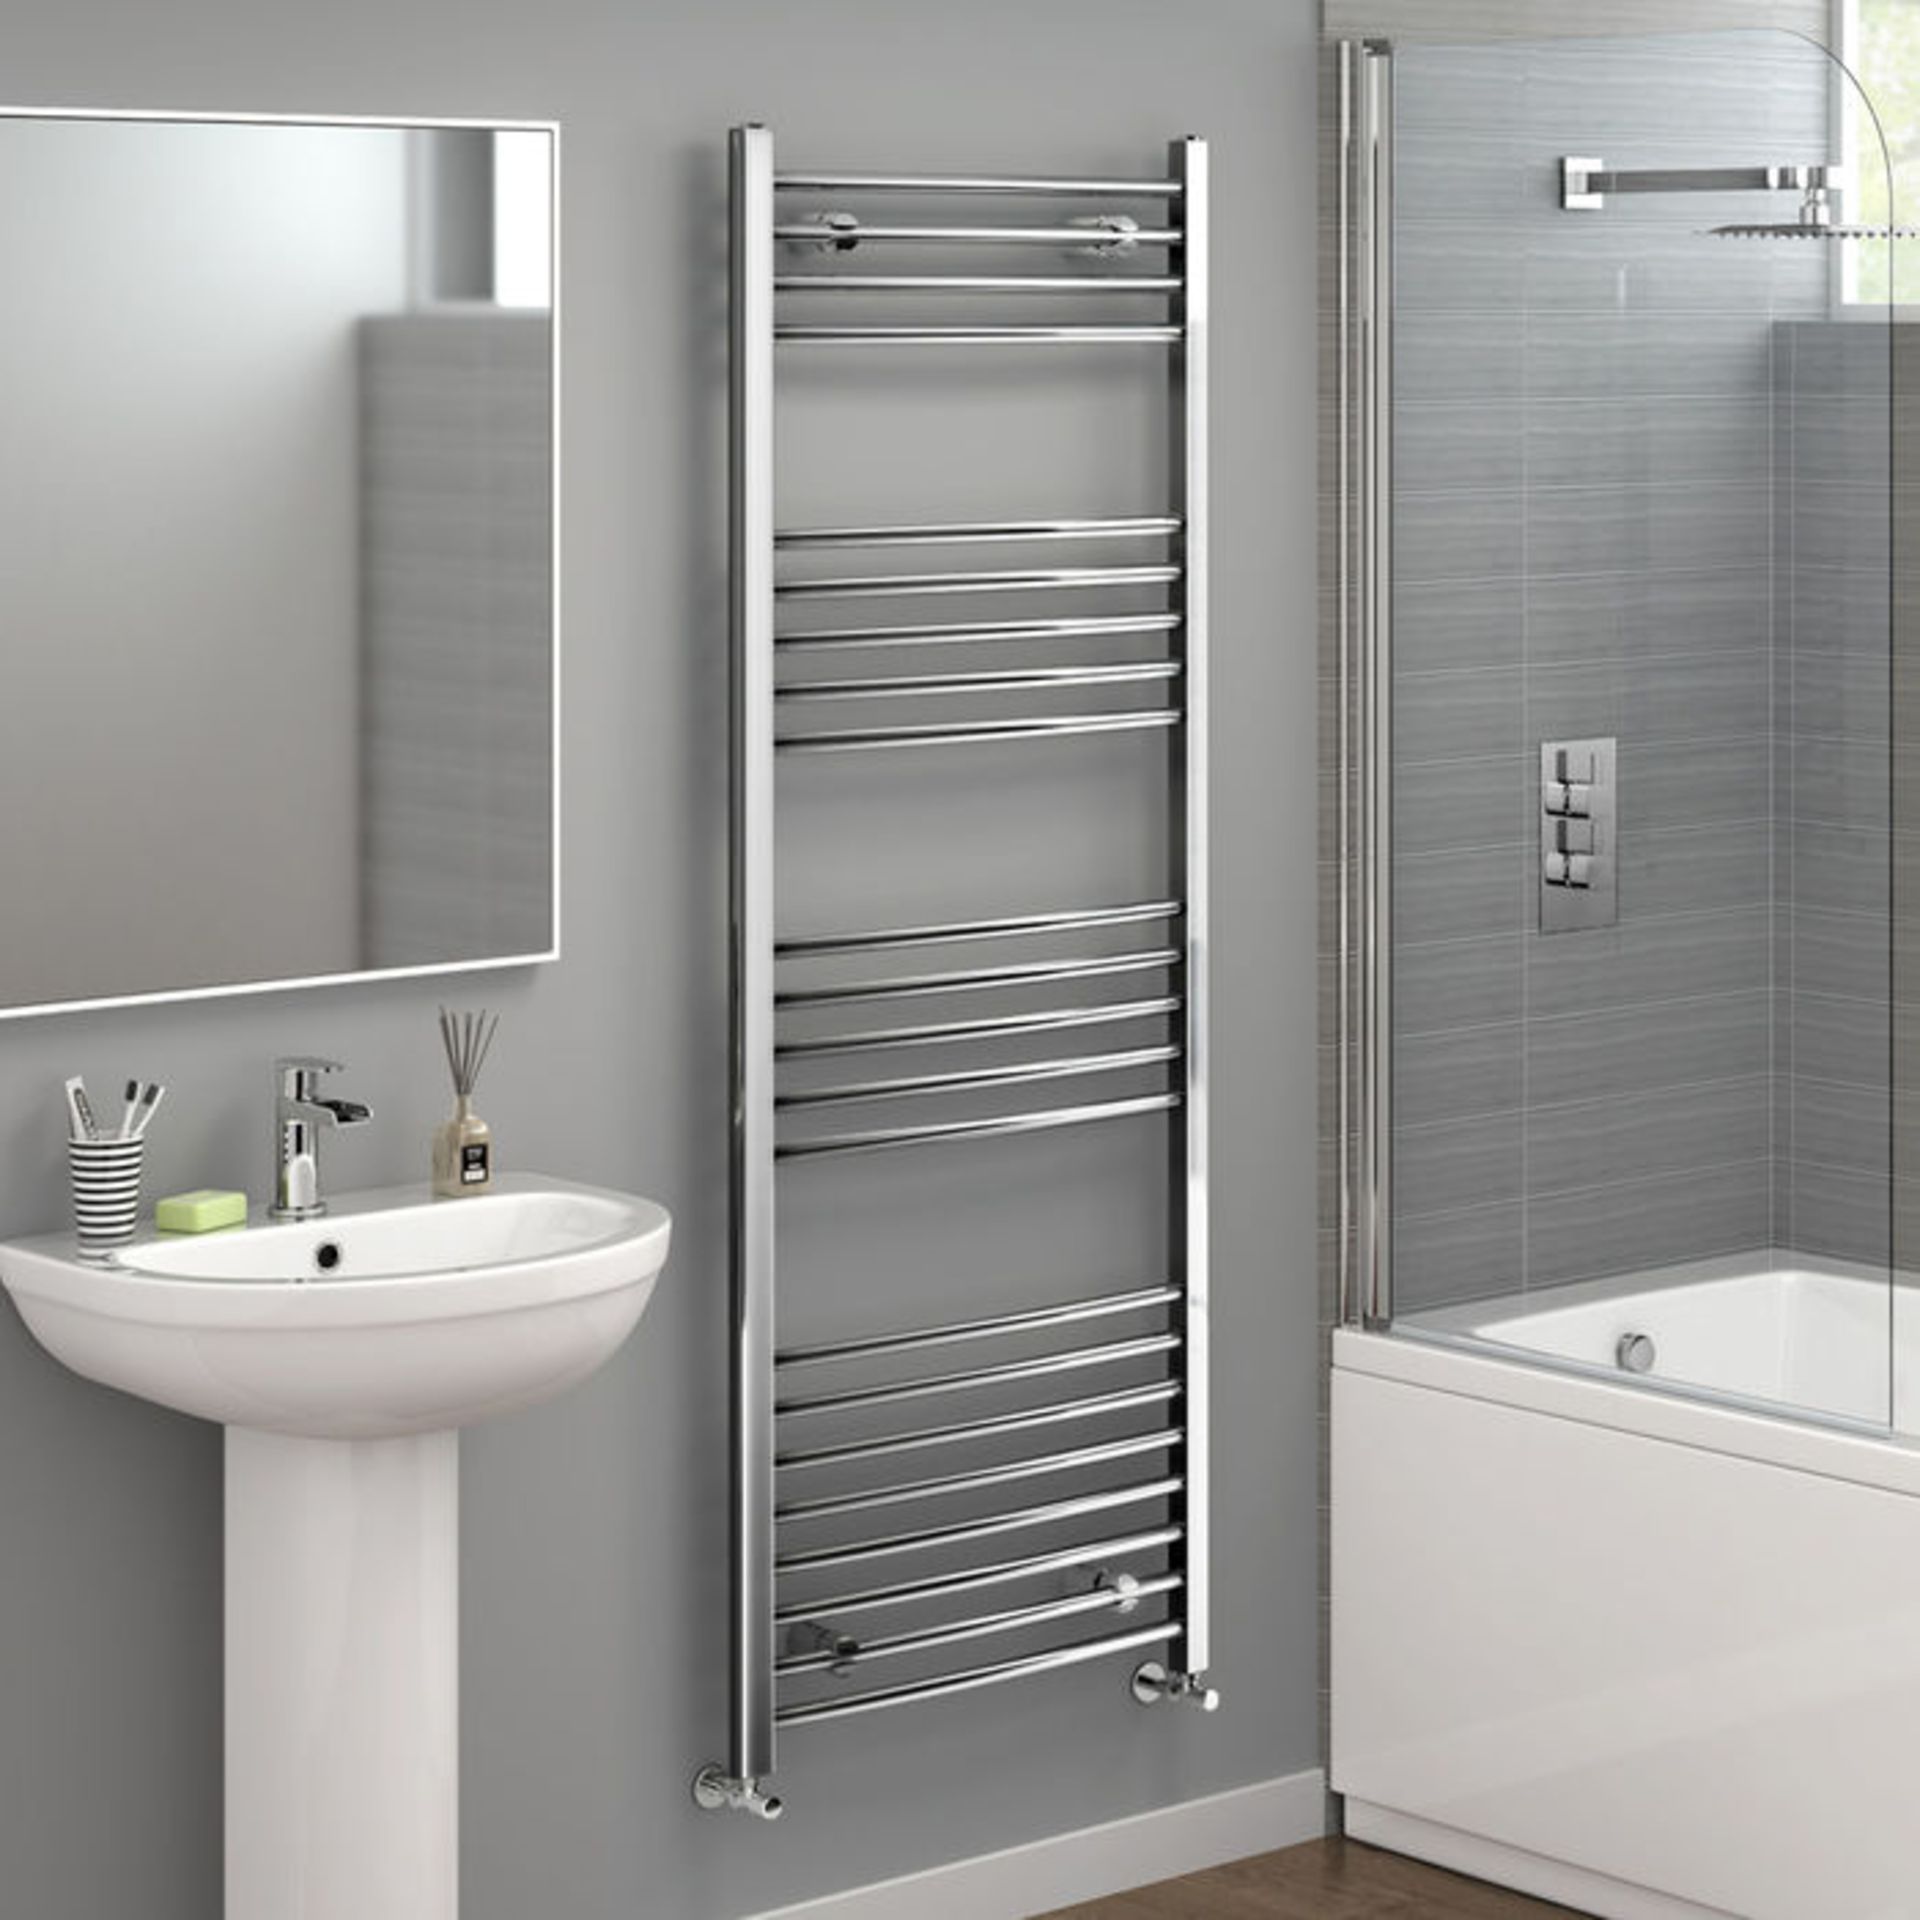 (PO125) 1600x600mm - 20mm Tubes - Chrome Curved Rail Ladder Towel Radiator. Made from chrome